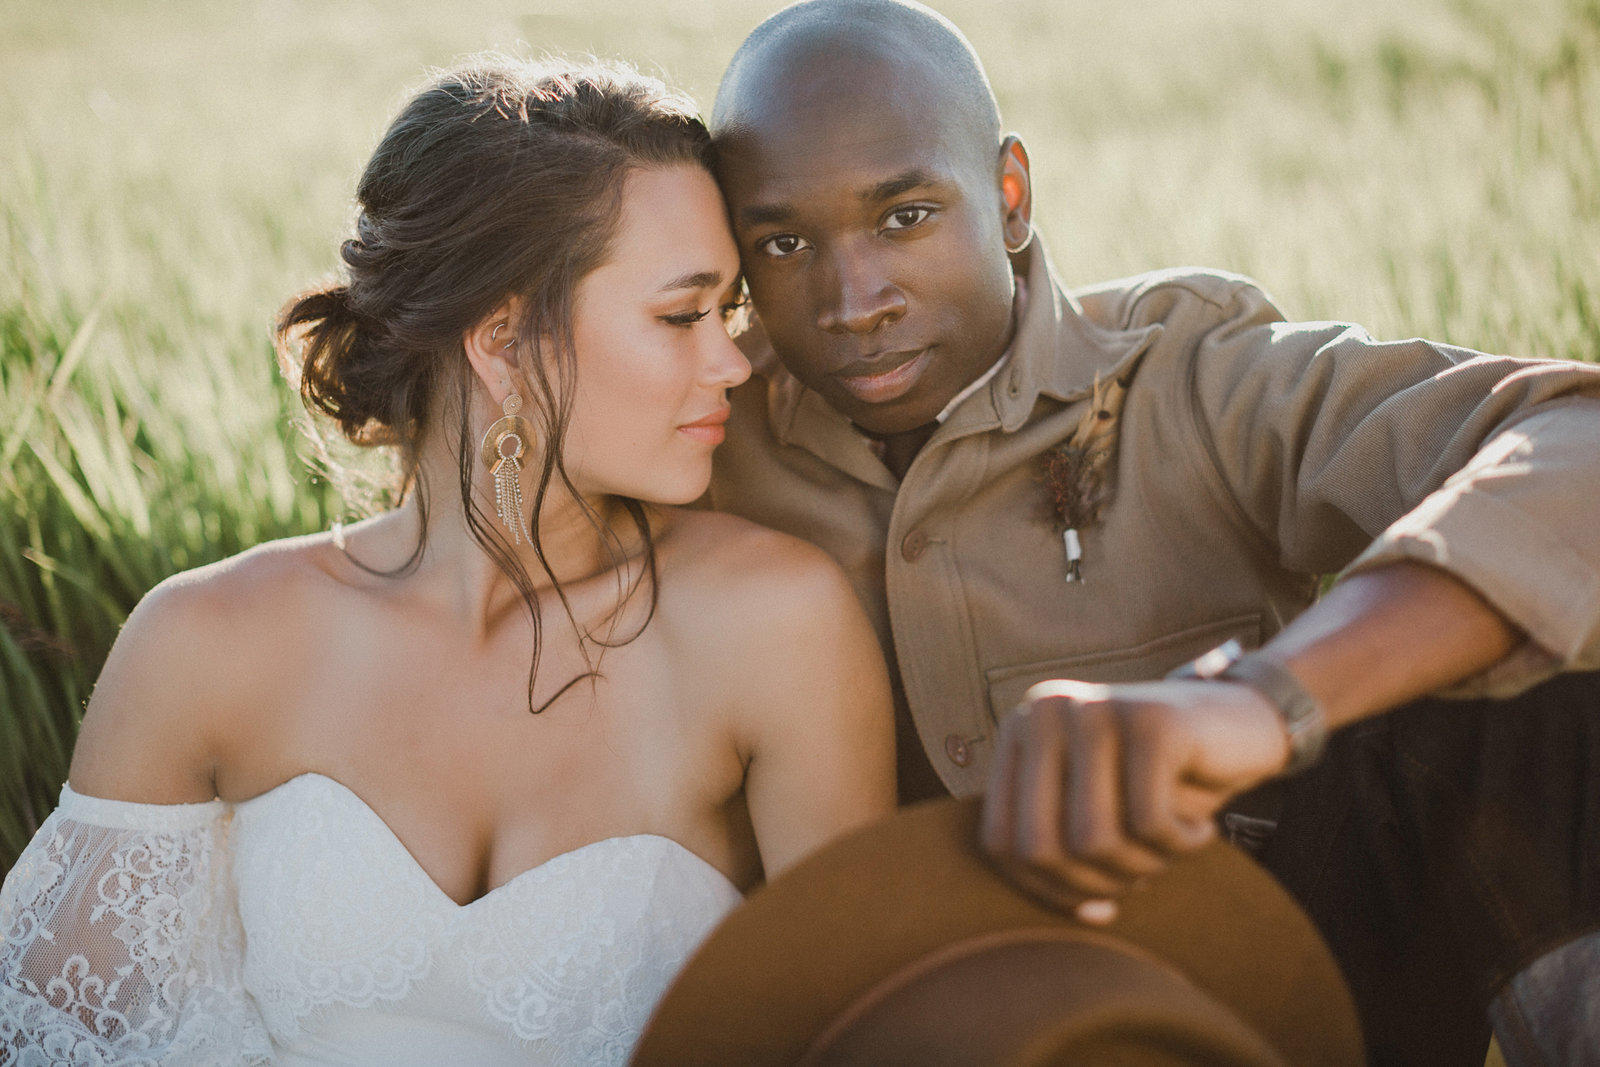 Intimate bi-racial elopement wedding in Montana, photographed by Sweetwater.